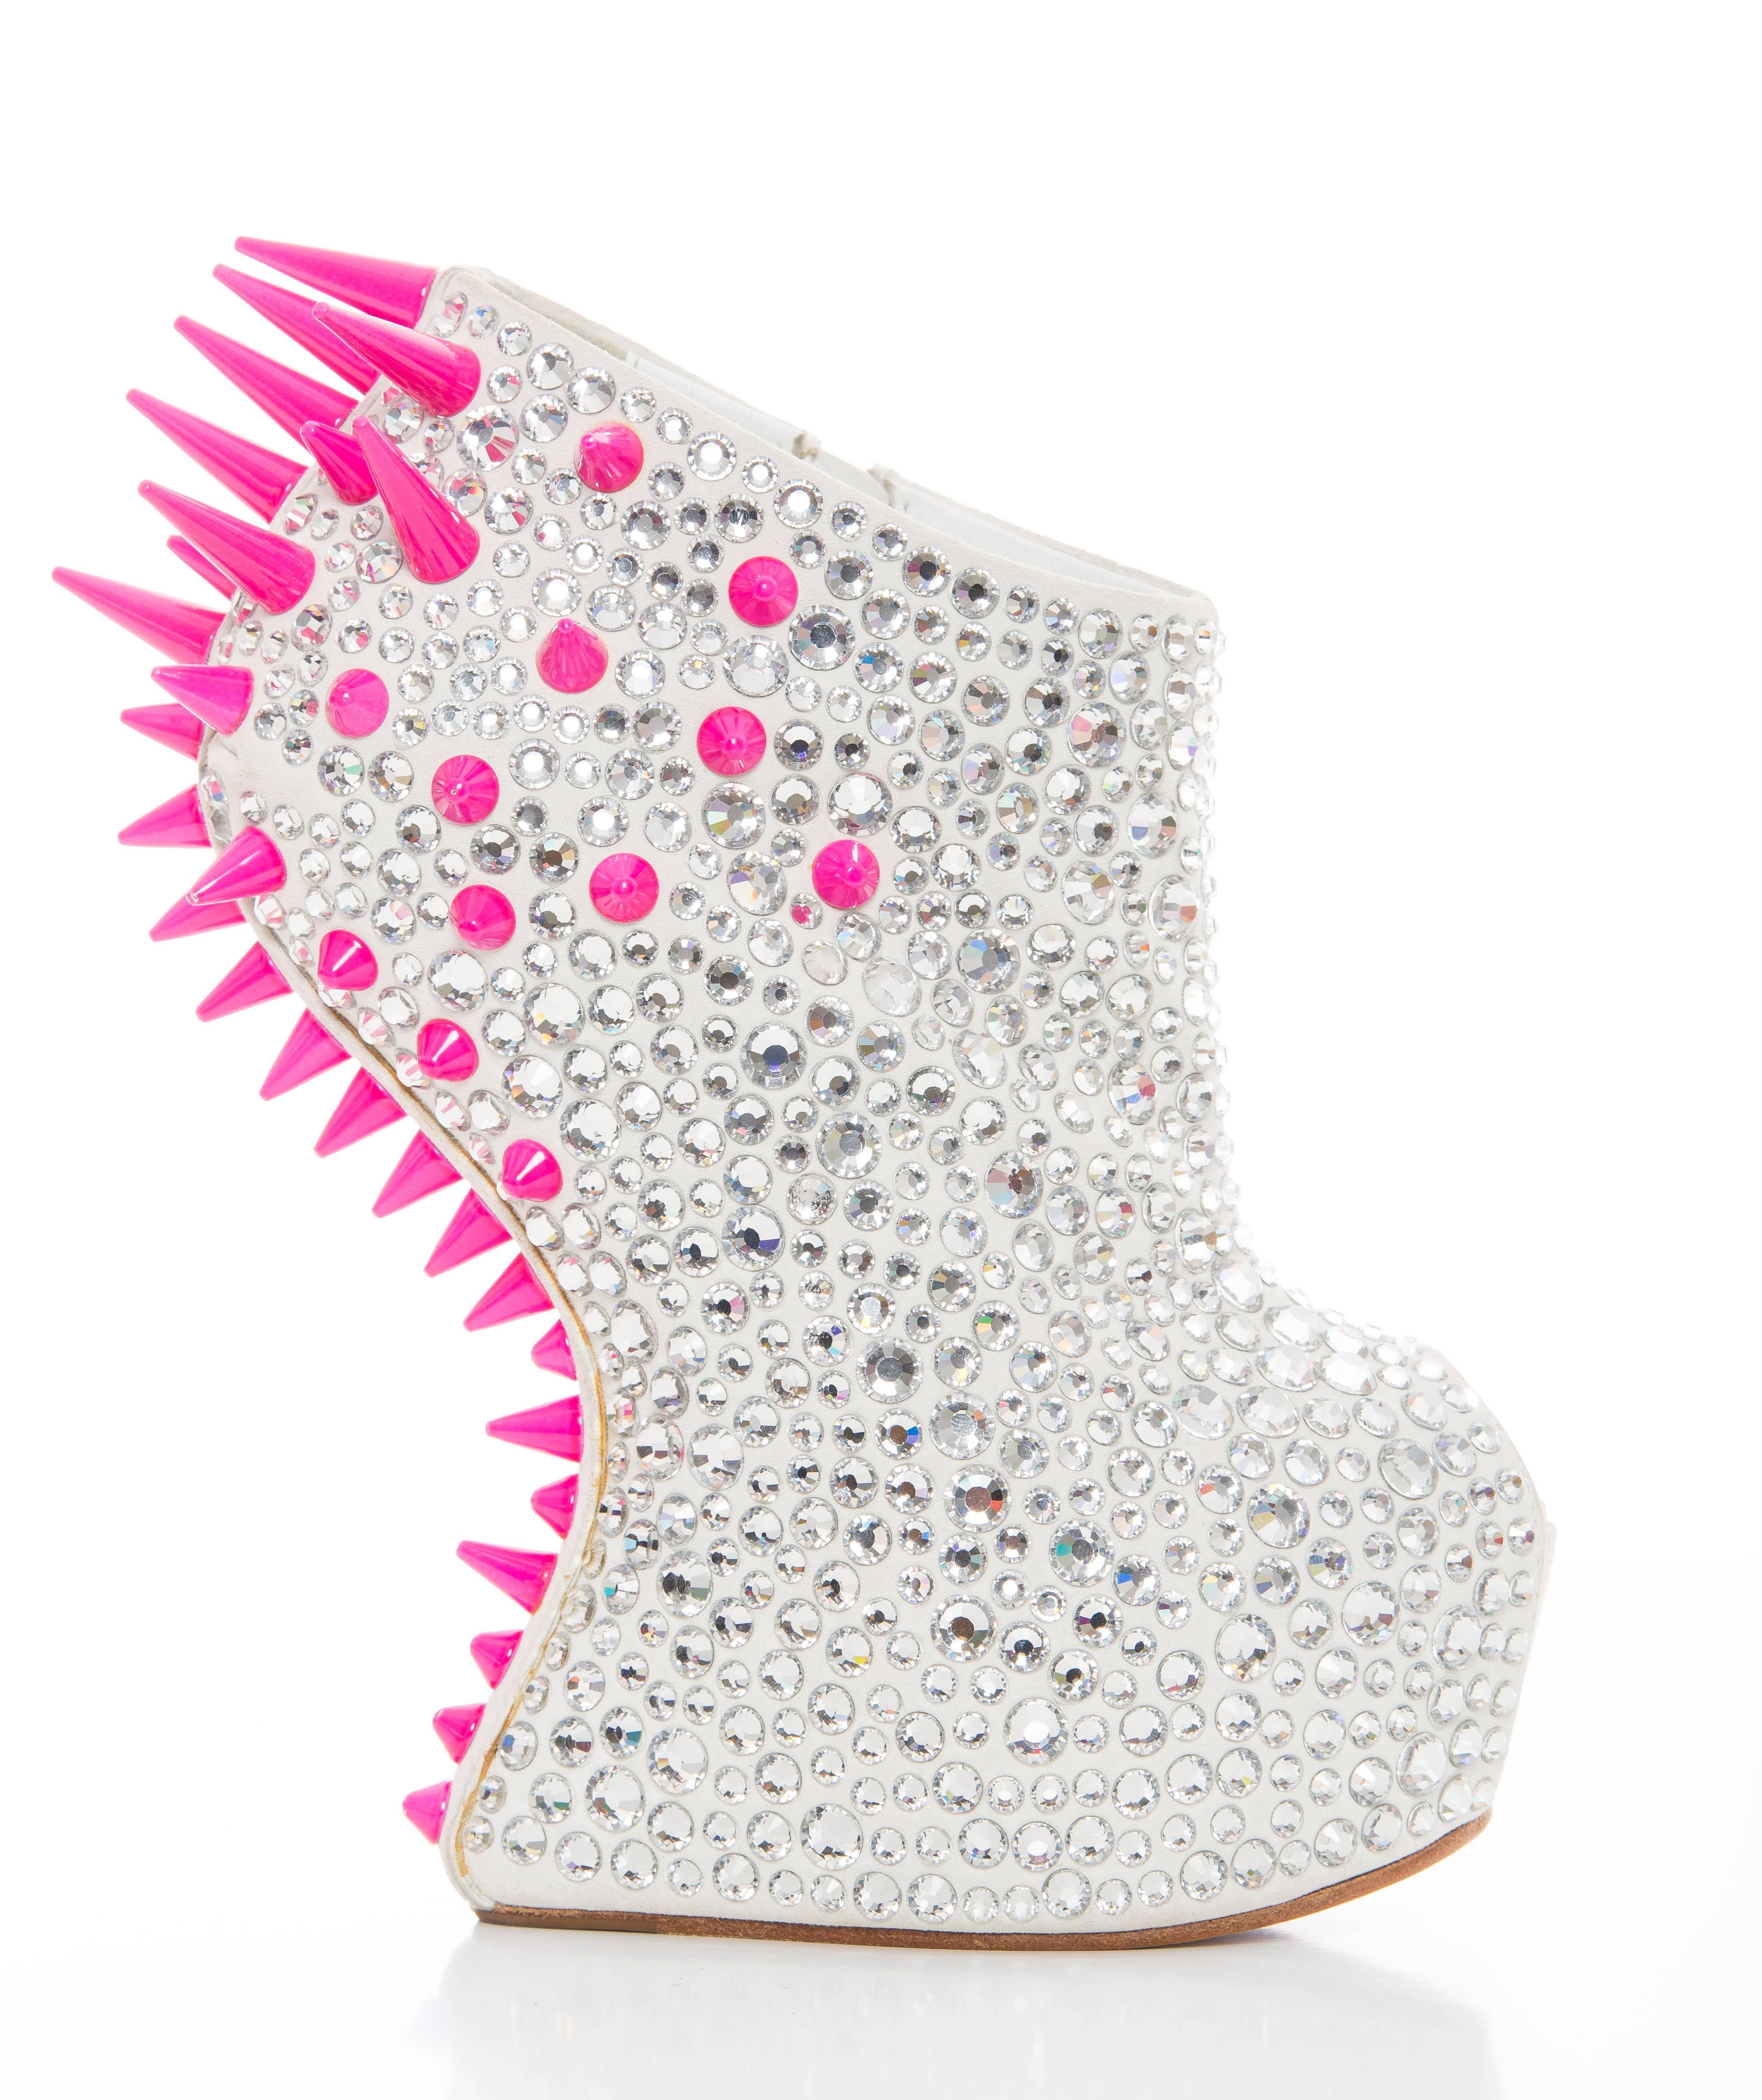 Giuseppe Zanotti, Fall 2012, Swarovski Crystal & Spike-Embellished Contour Wedges with zip closure at sides.

Heels 6.25